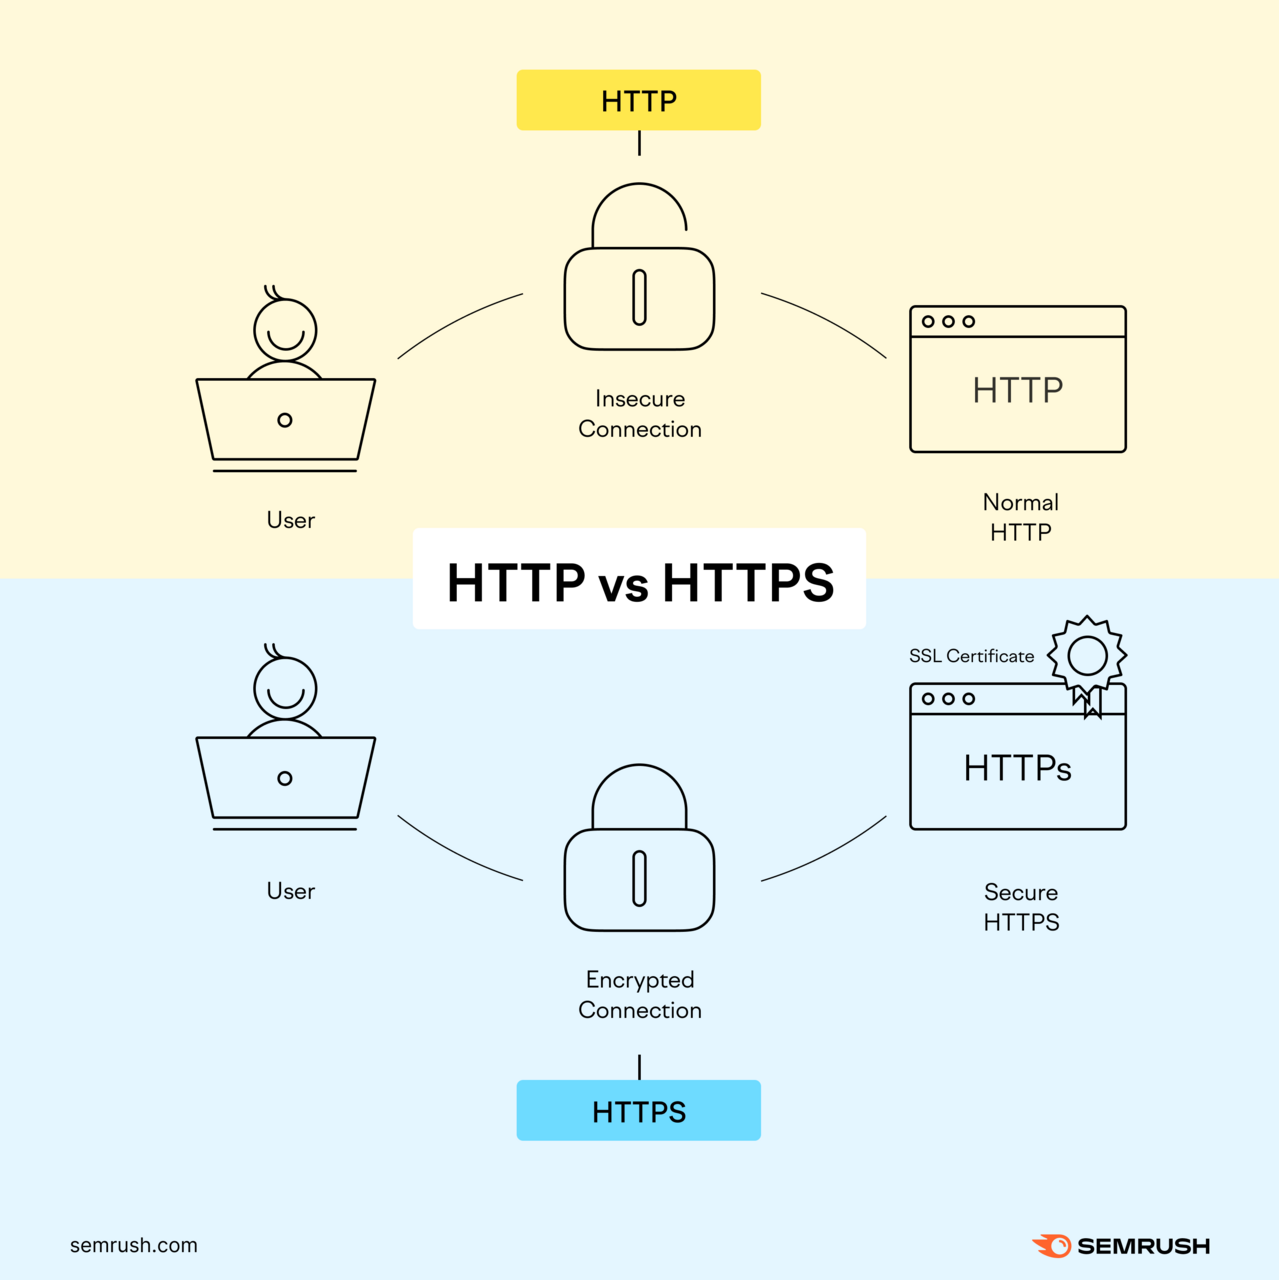 HTTP travel  is idiosyncratic    to insecure transportation  to mean   HTTP. HTTPS travel  is idiosyncratic    to encrypted transportation  to unafraid  HTTPS.